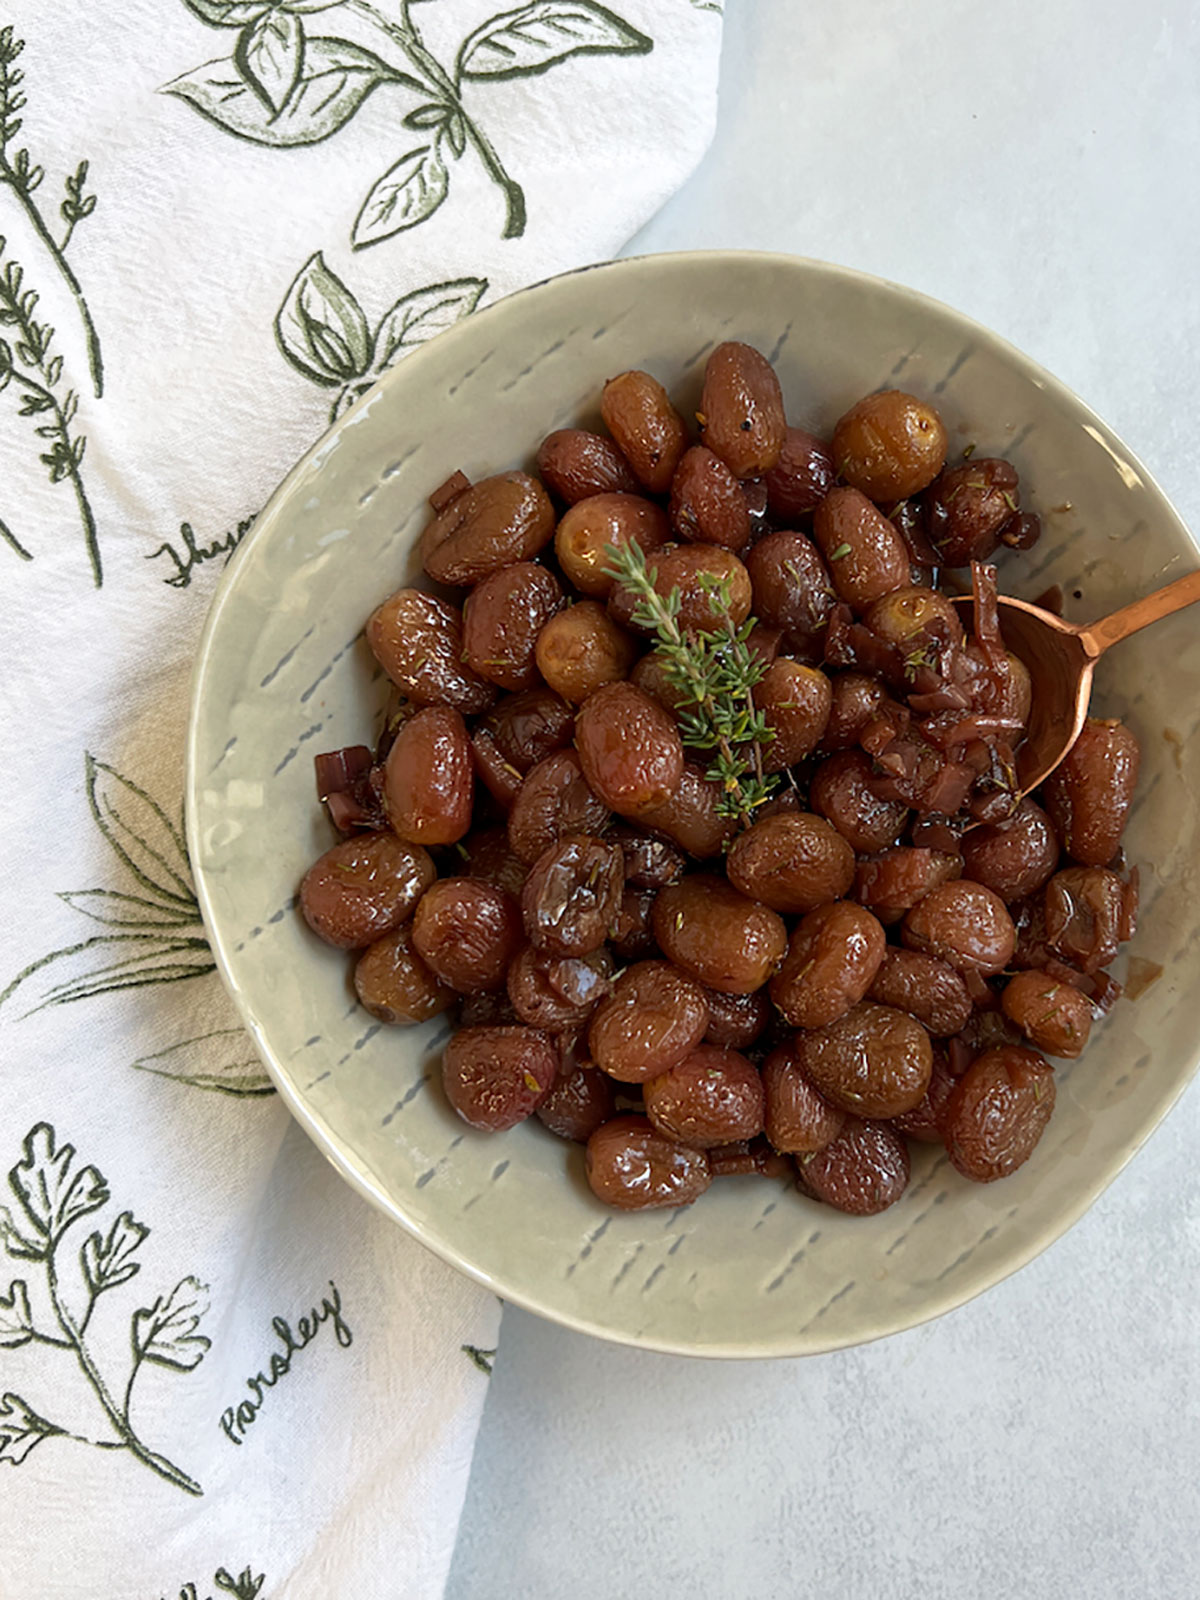 Roasted grapes in a bowl with a copper spoon.